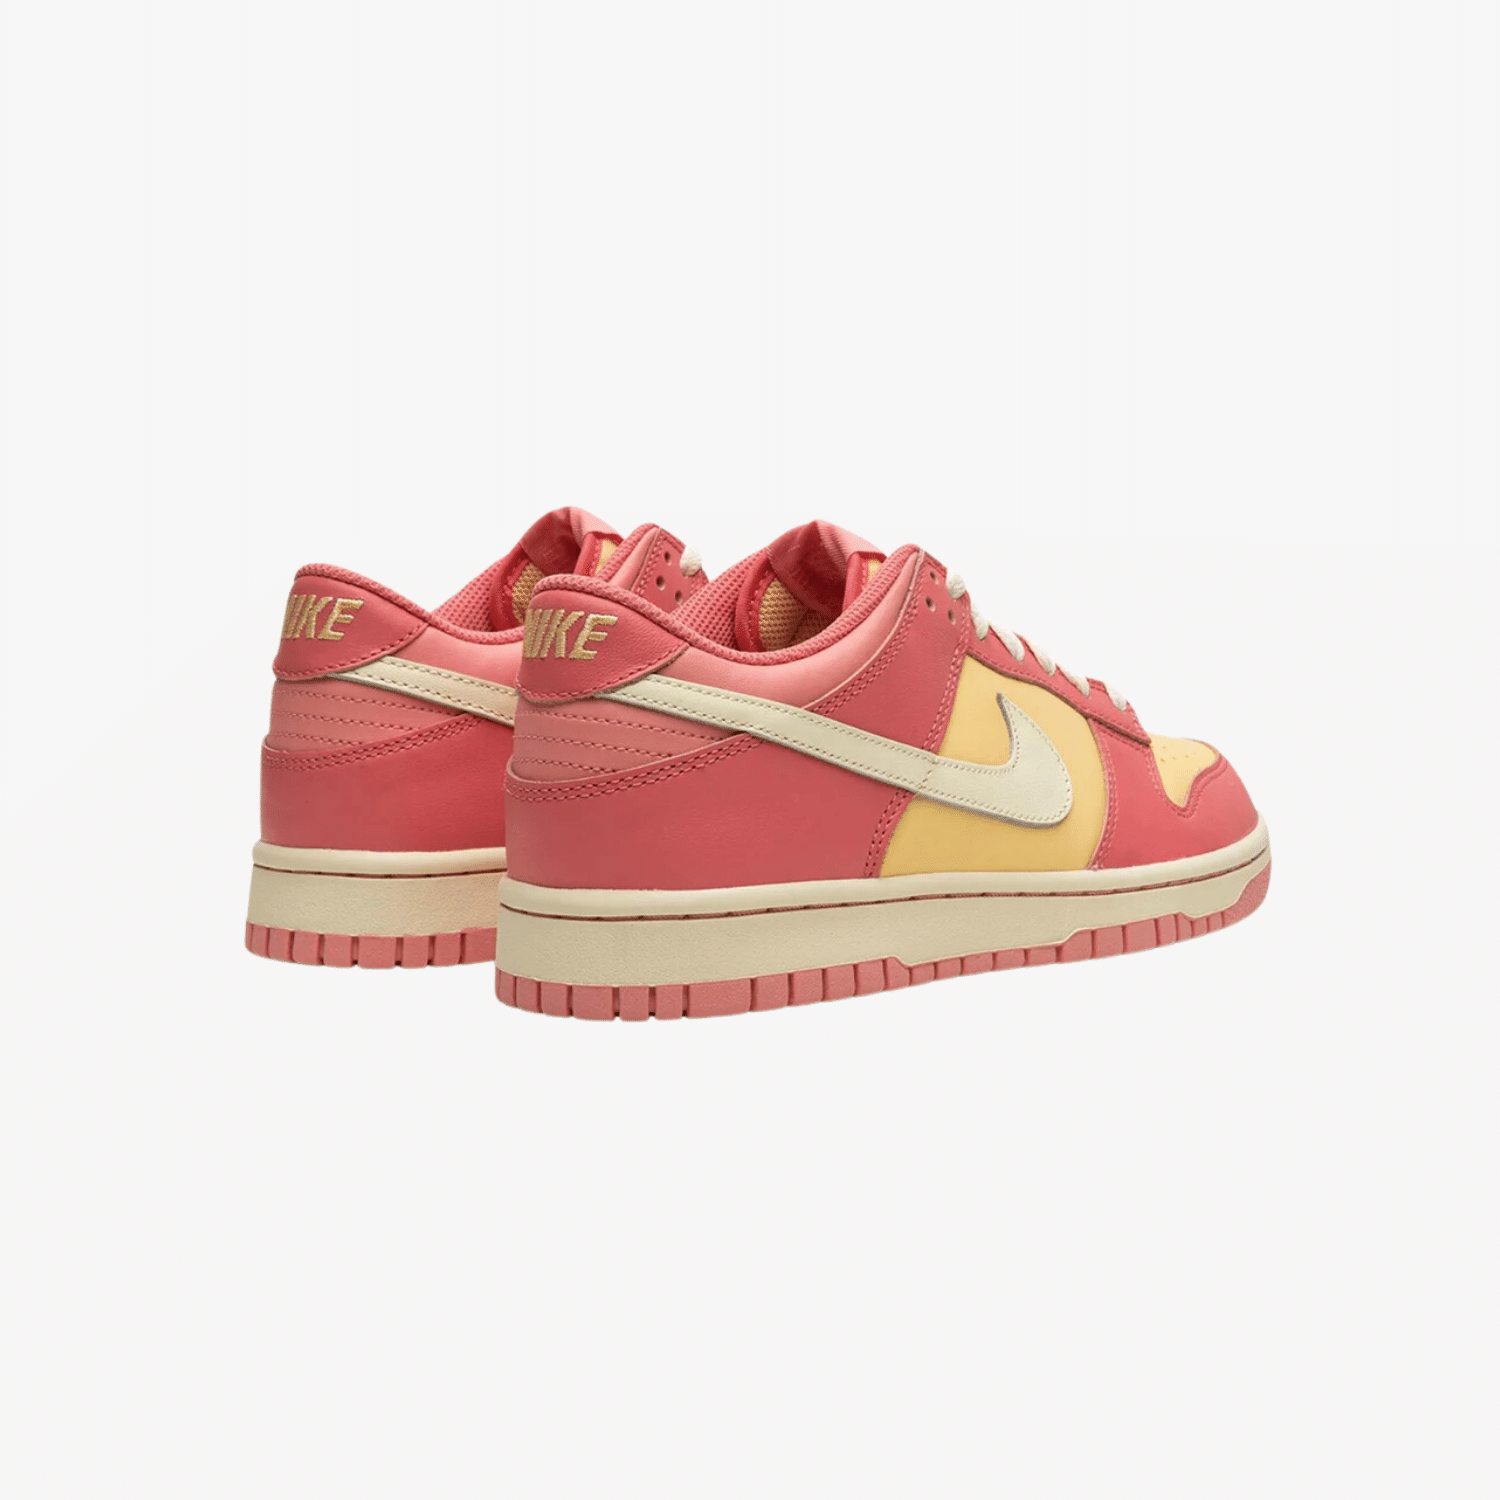      nike-dunk-low-strawberry-cream-DH9765-200-unfazed-3